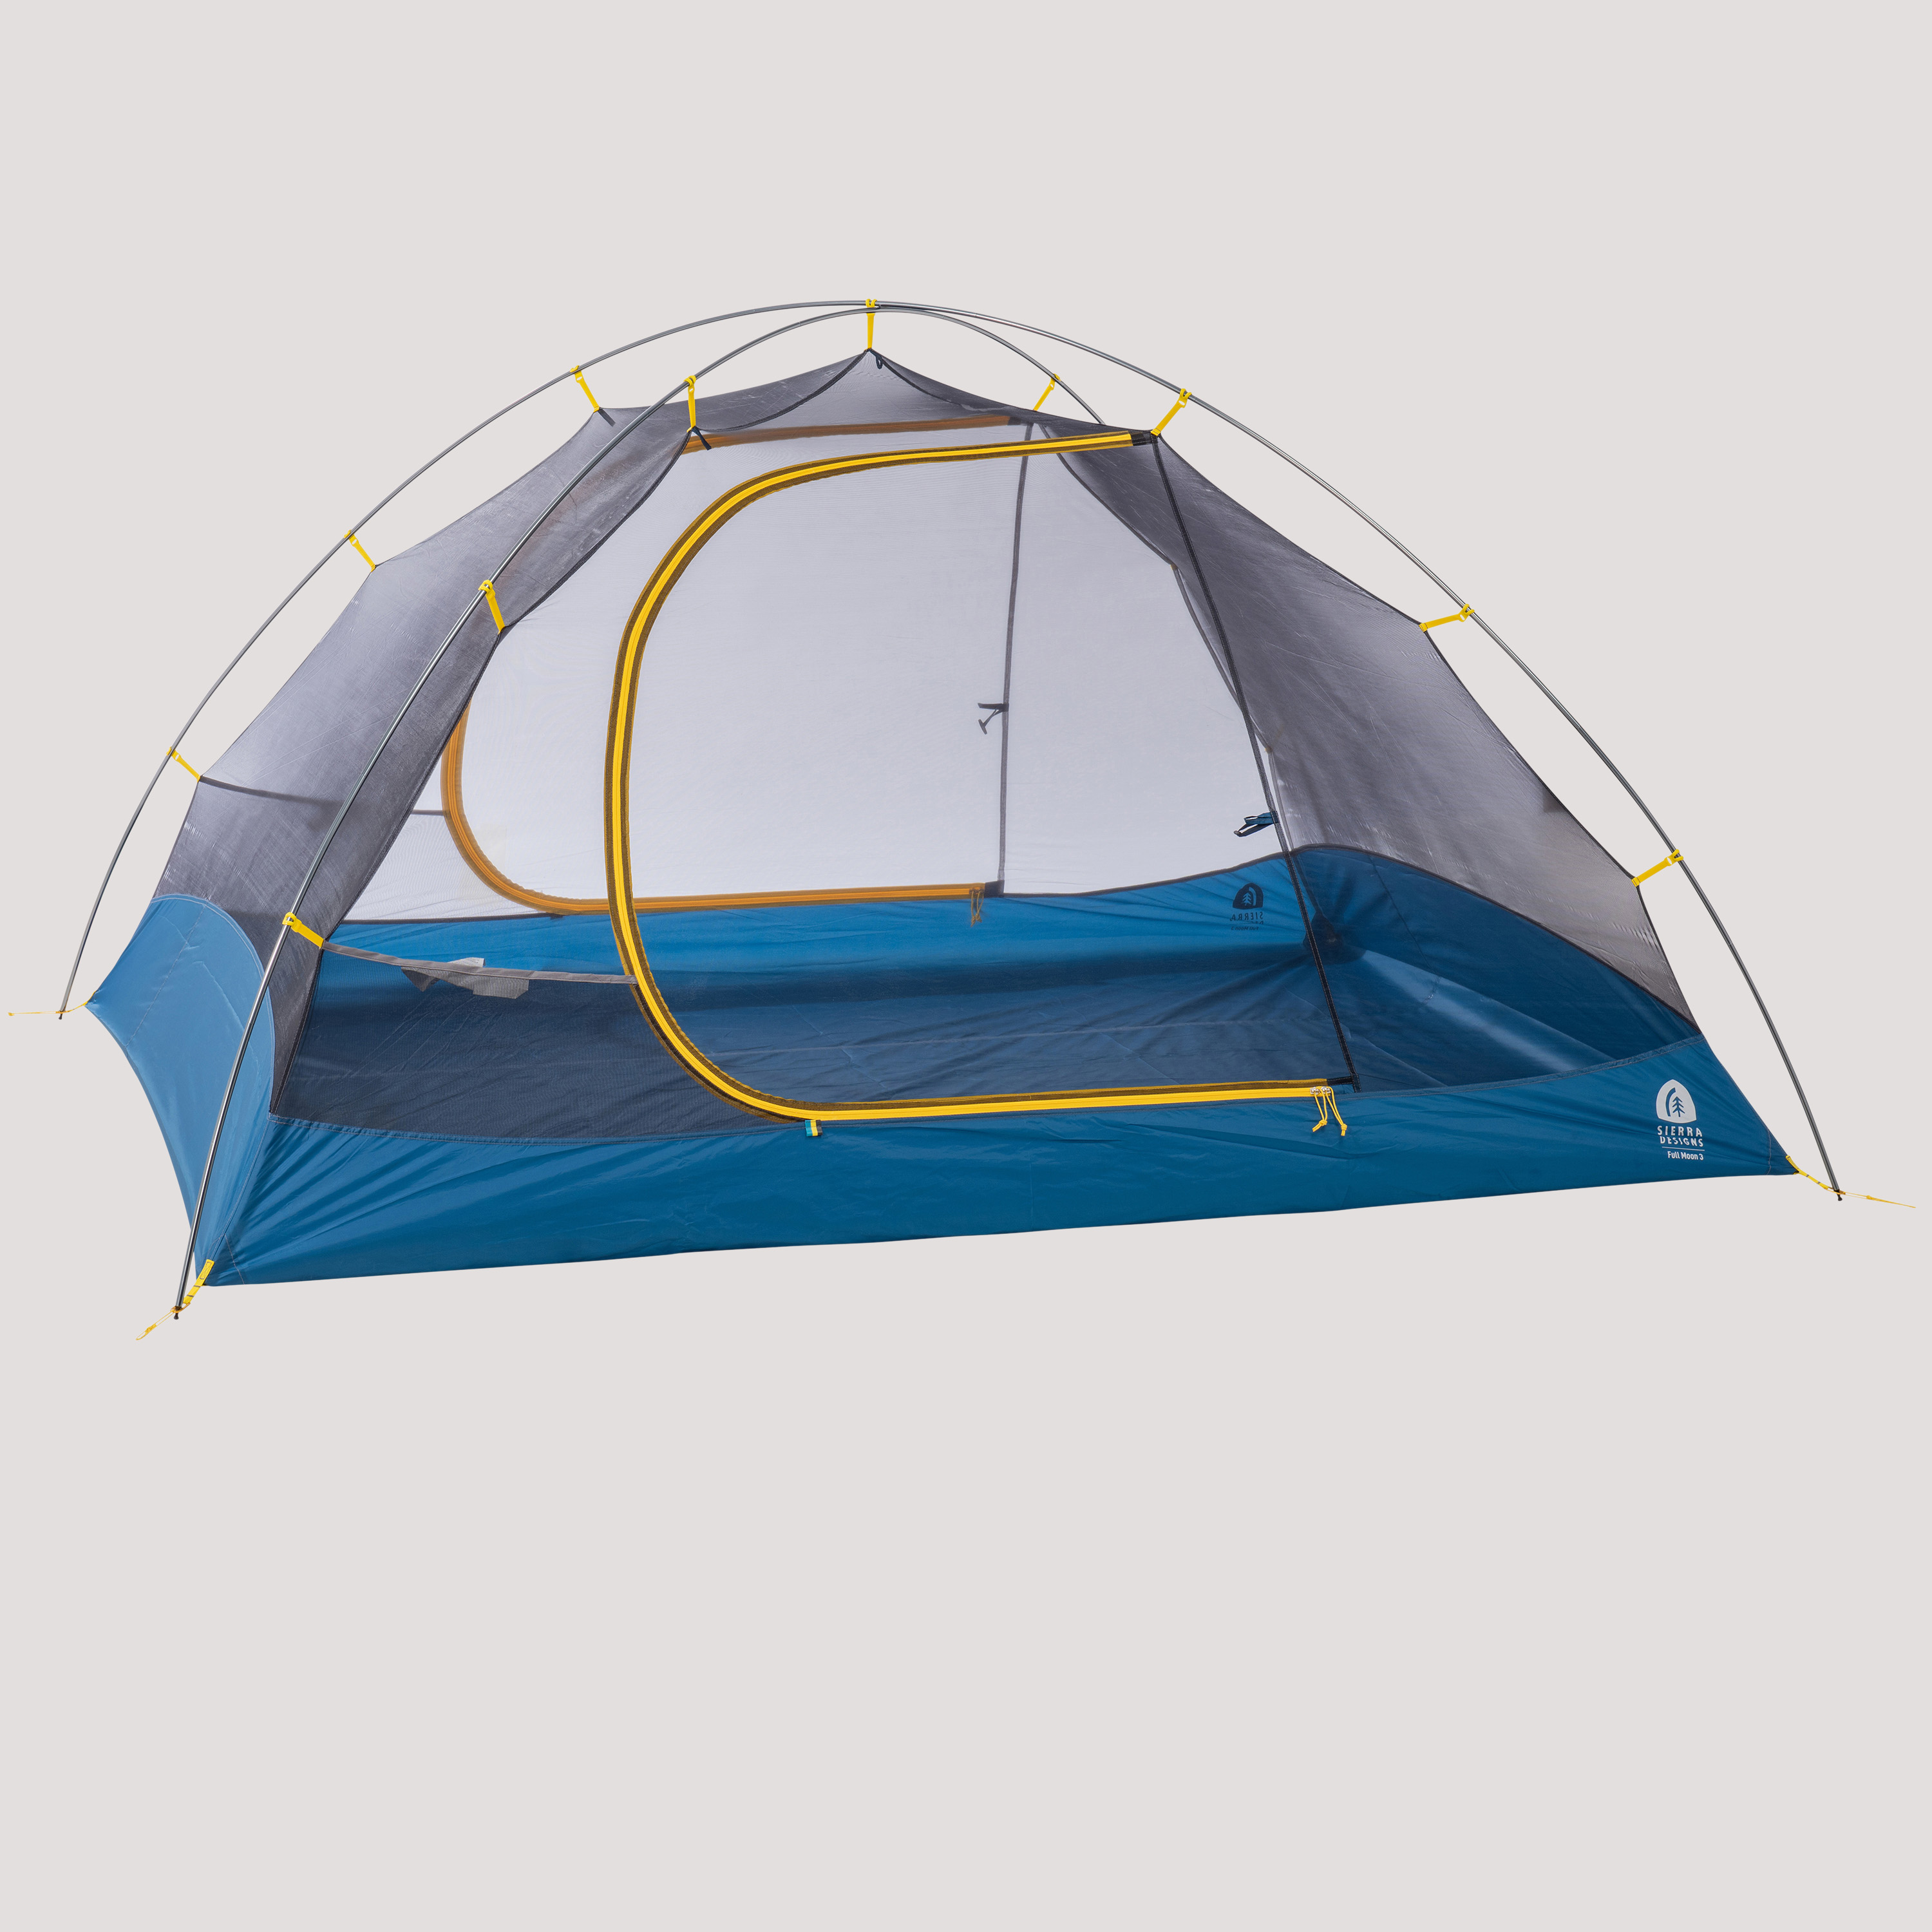 Full Moon 3 Person Backpacking Tent | Sierra Designs Tents